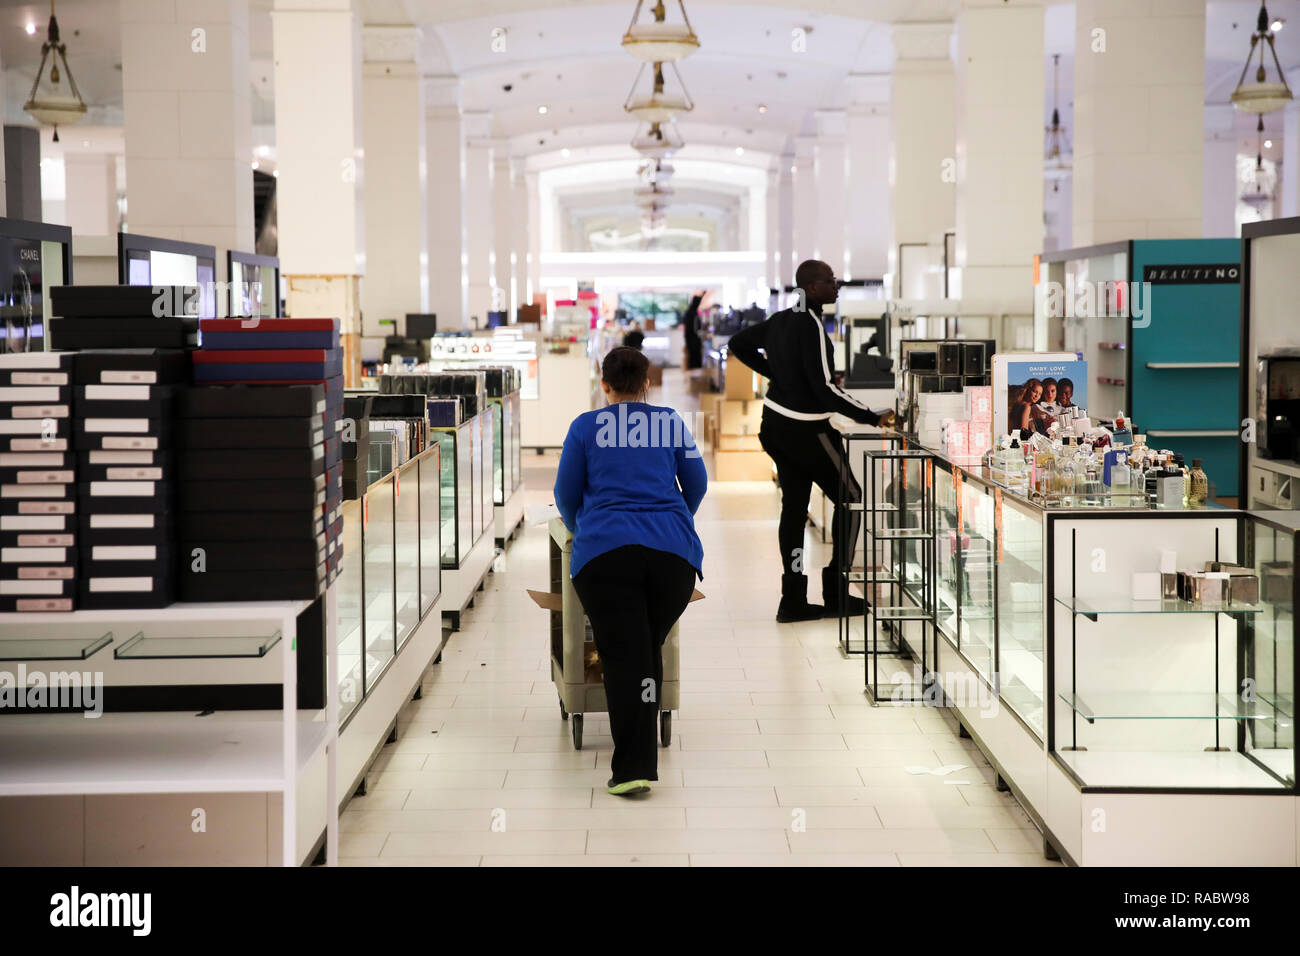 New York, USA. 3rd Jan, 2019. Staff members clear goods at Lord & Taylor flagship store on Fifth avenue in Manhattan, New York City, the United States, on Jan. 3, 2019. The famous department store chain Lord & Taylor officially closed its flagship store on Fifth avenue in Manhattan. The 11-storey building was a landmark on New York's most prestigious shopping area for over a century, boasting about its animated holiday windows and fine selection of jewelries and clothing and attracting city dwellers and tourists alike. Credit: Wang Ying/Xinhua/Alamy Live News Stock Photo